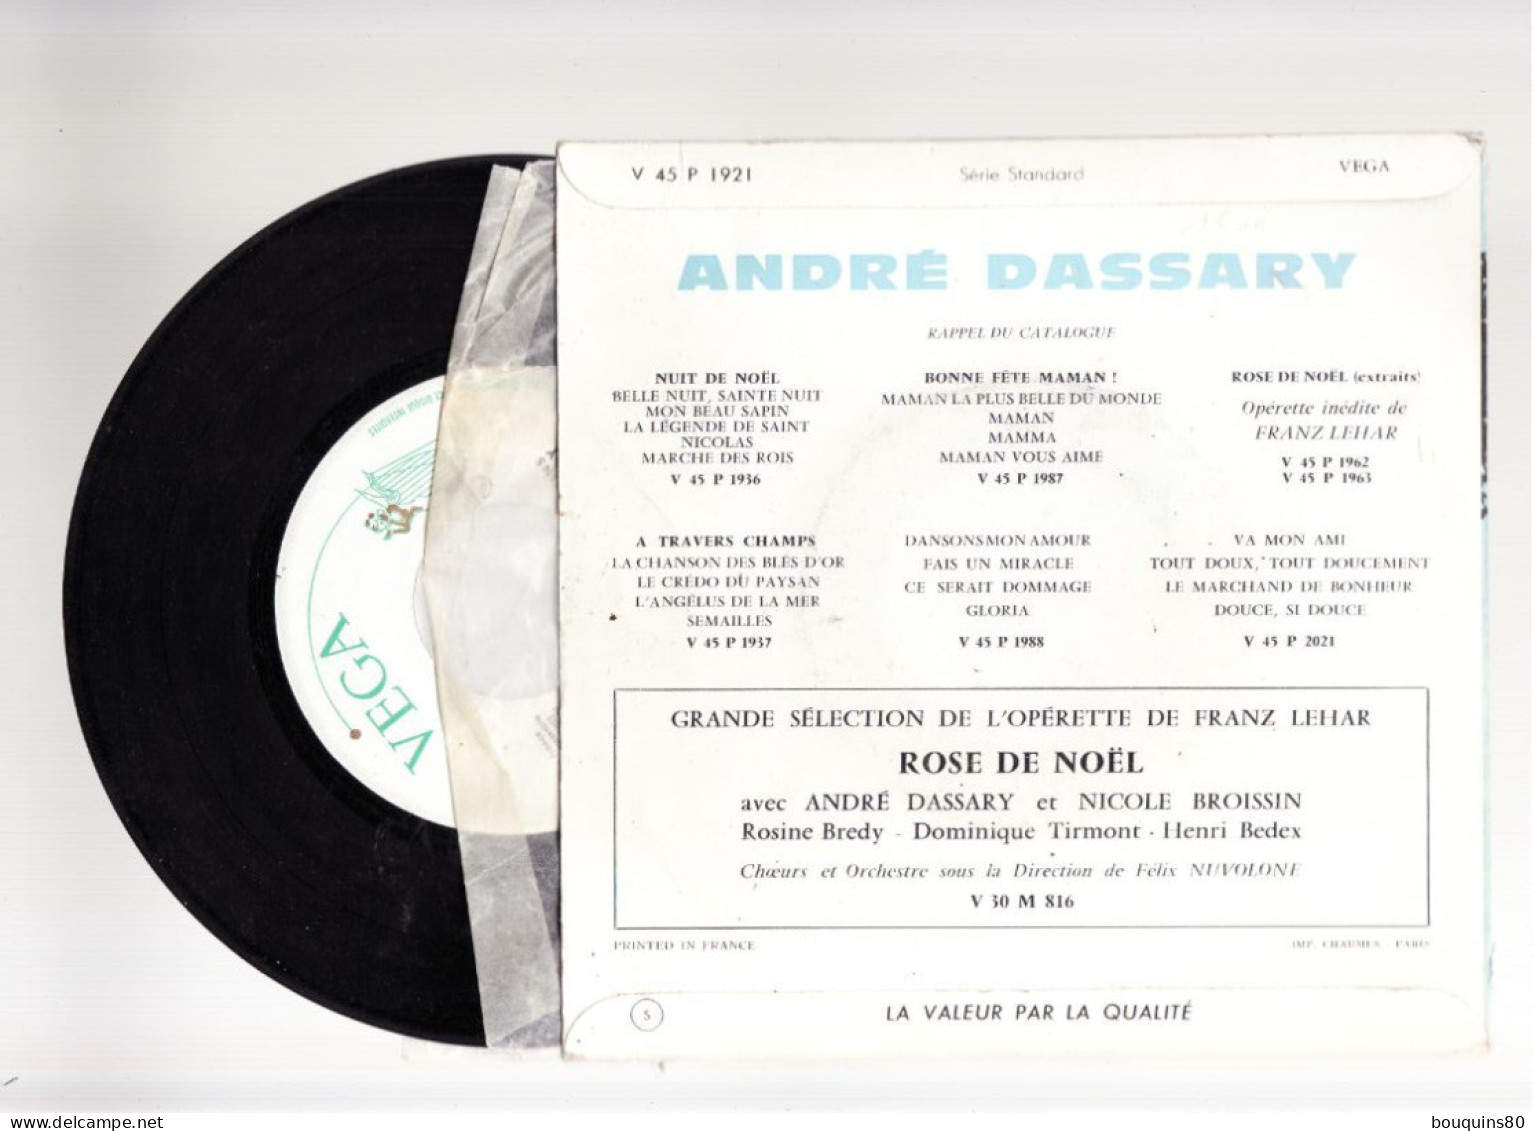 ANDRE DASSARY MARCHES ET CHANTS REPUBLICAINS LA MARSEILLAISE - Other - French Music